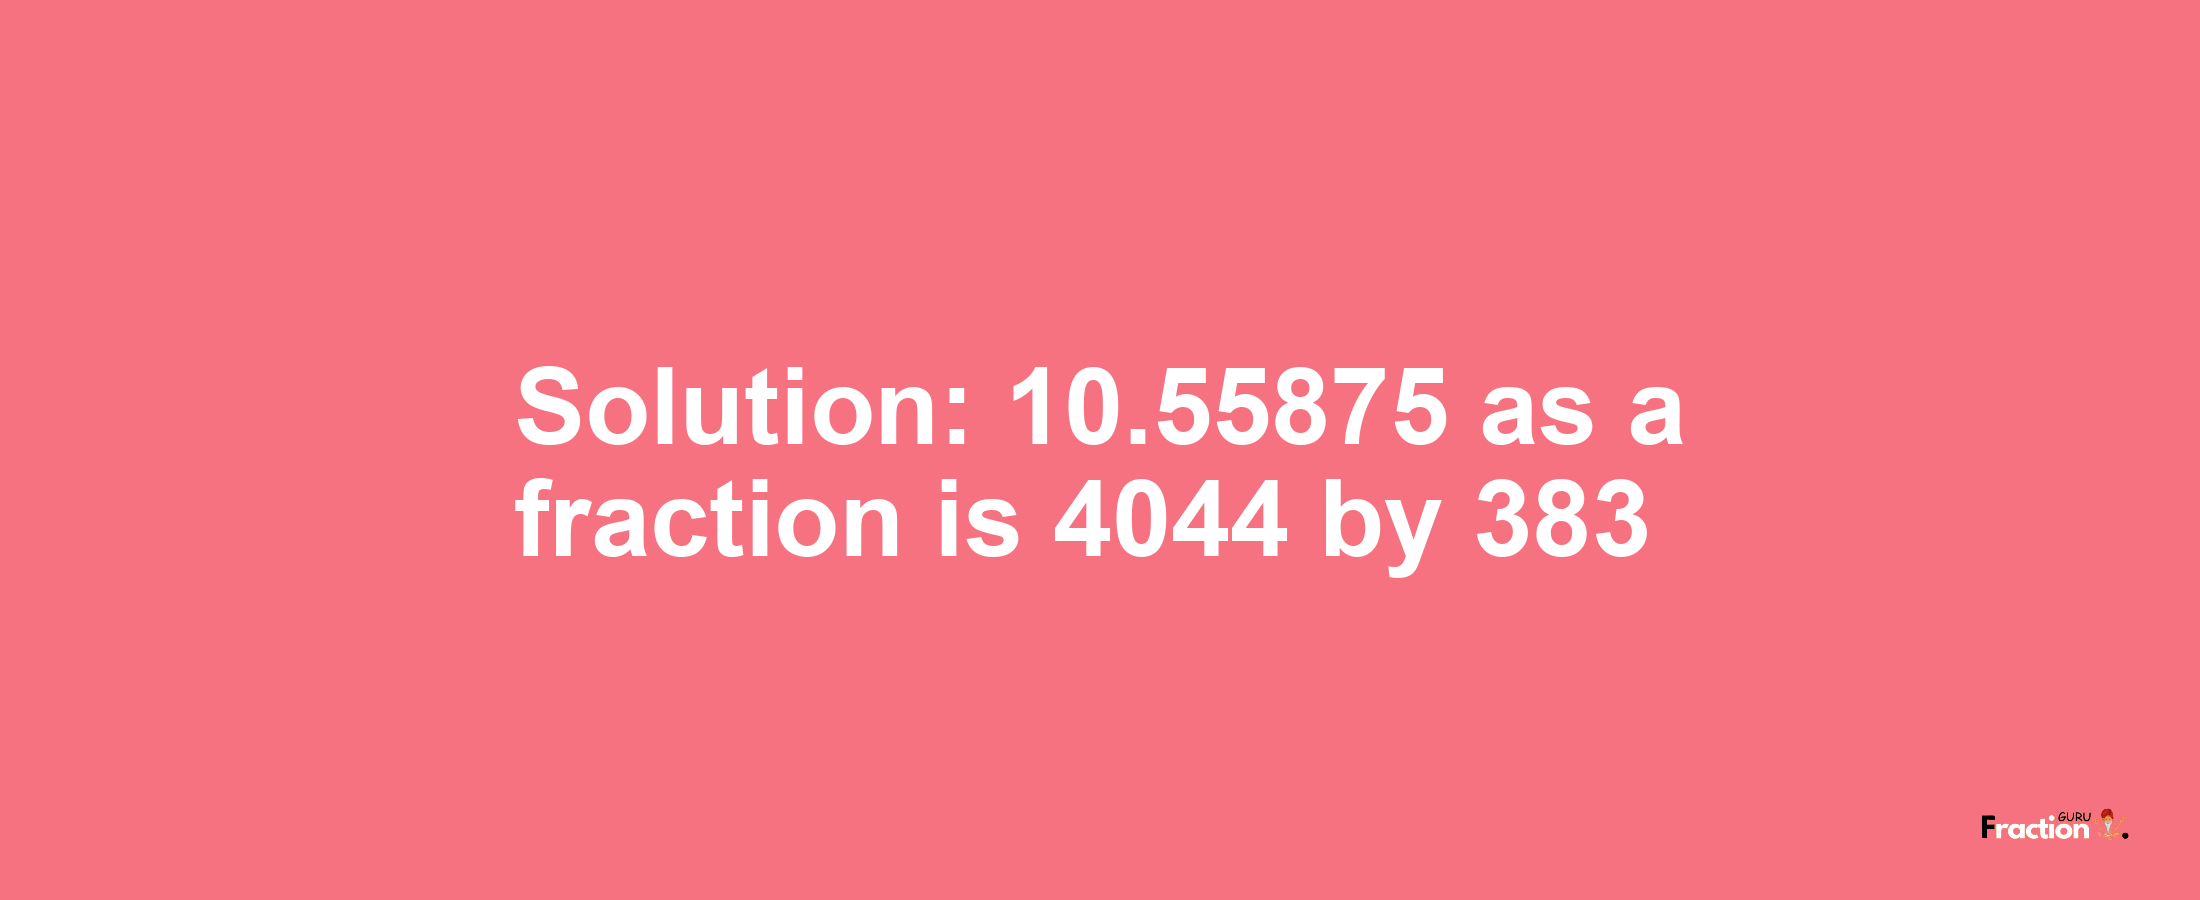 Solution:10.55875 as a fraction is 4044/383